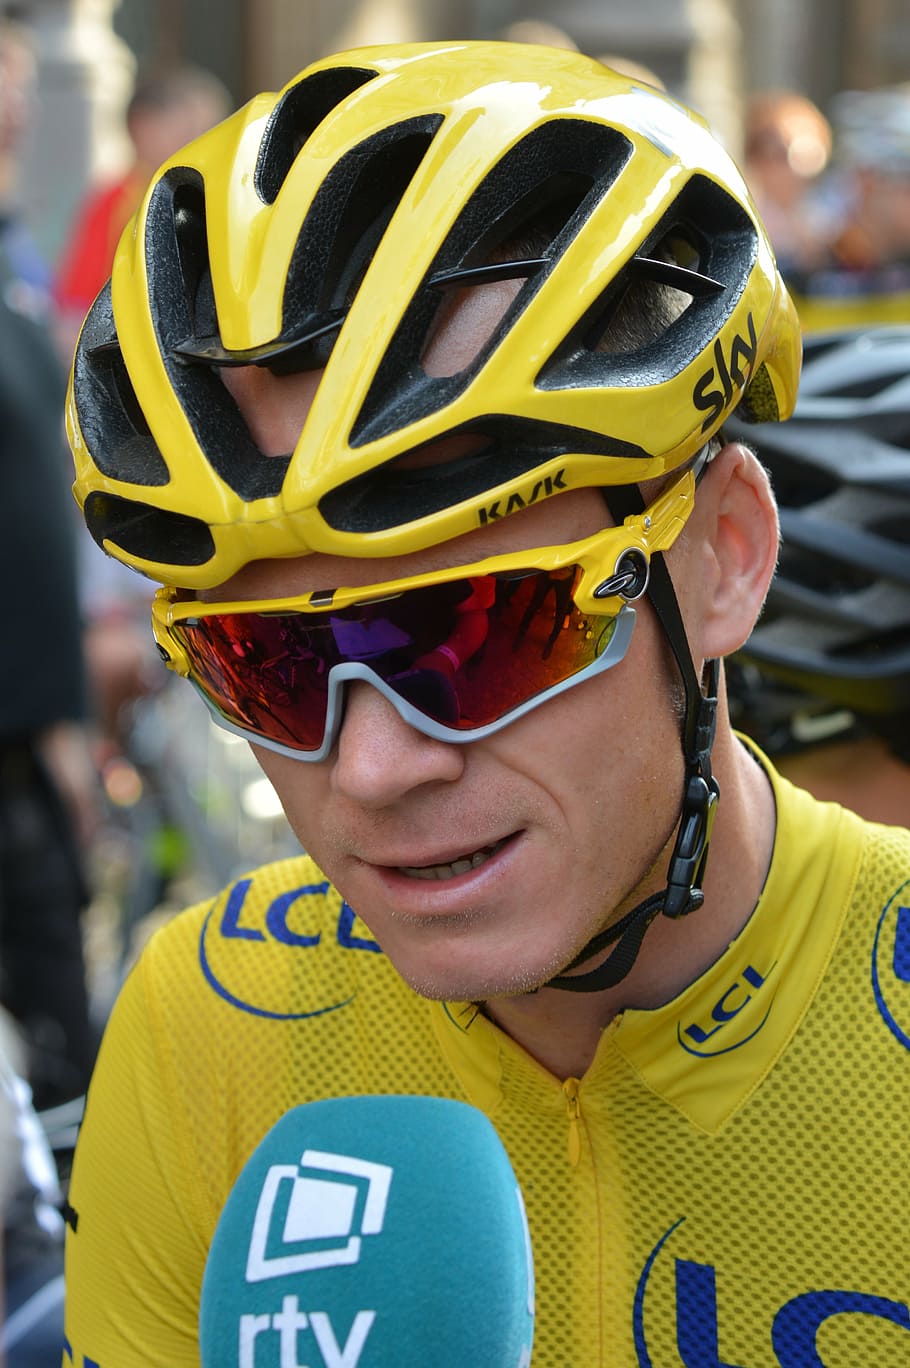 chris froome, champion, yellow jersey, celebrity, cyclist, professional road bicycle racer, man, people, winner, men